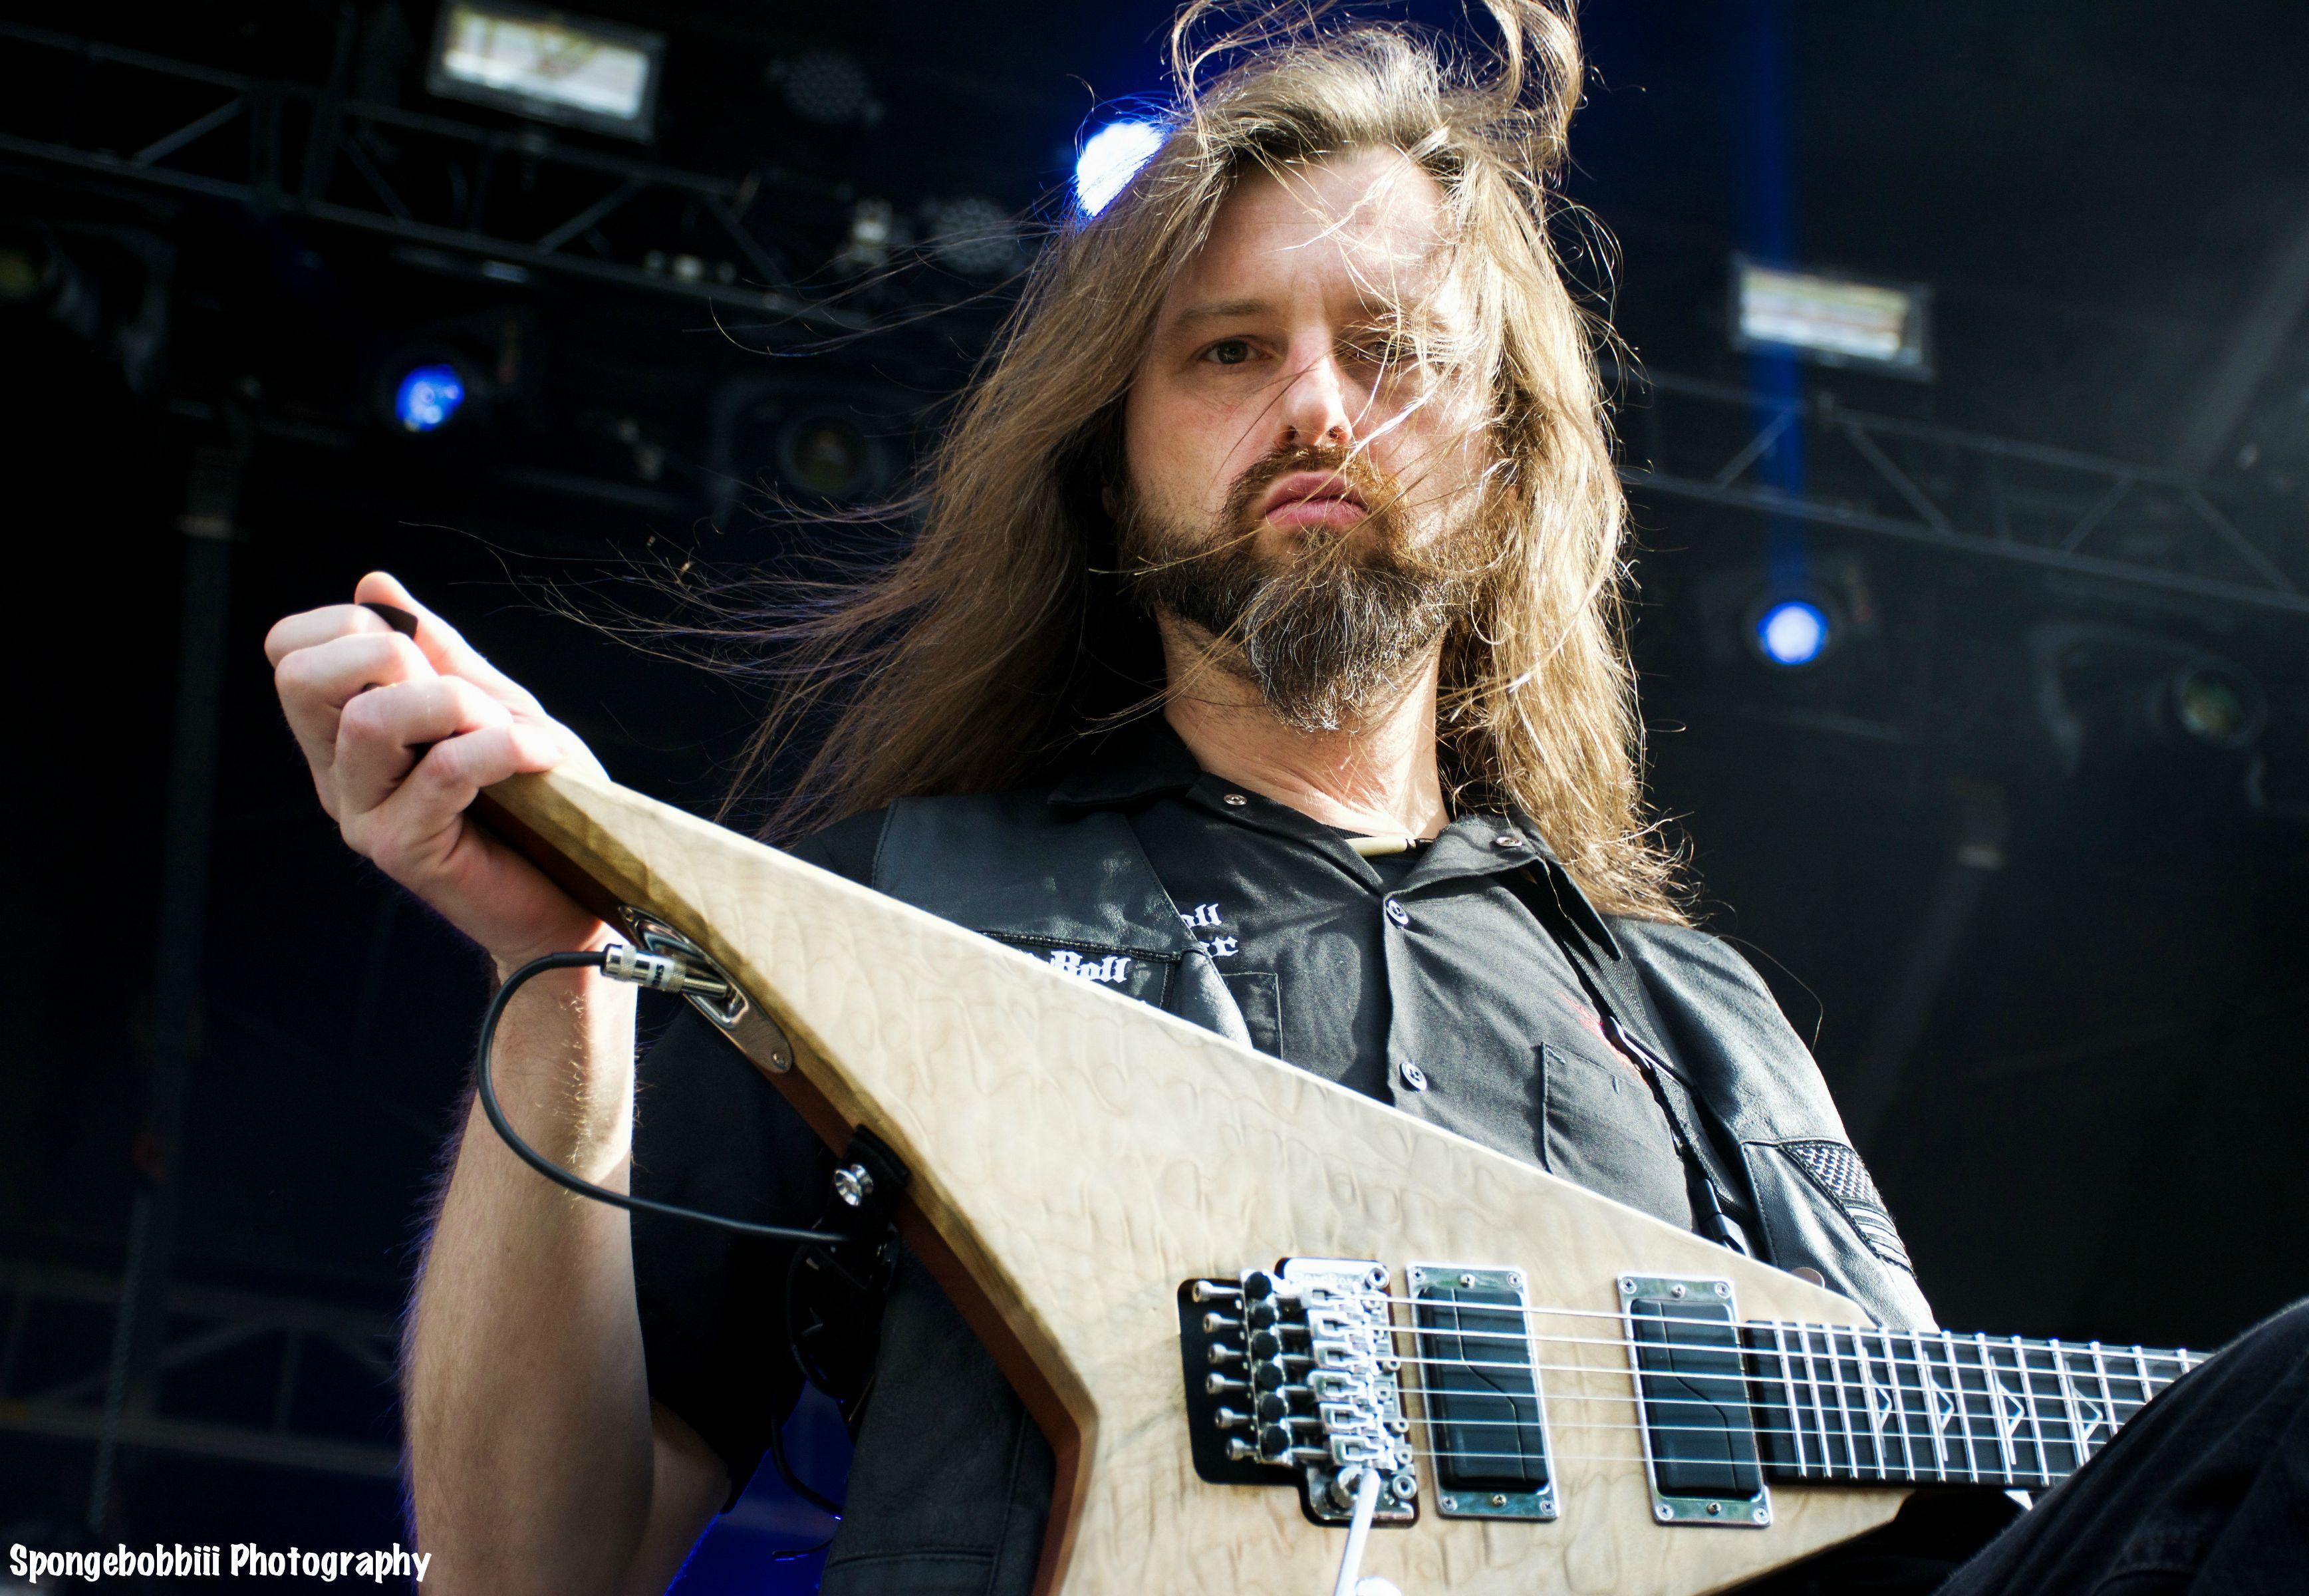 Oli Herbert of All That Remains is probably the MOST entertaining